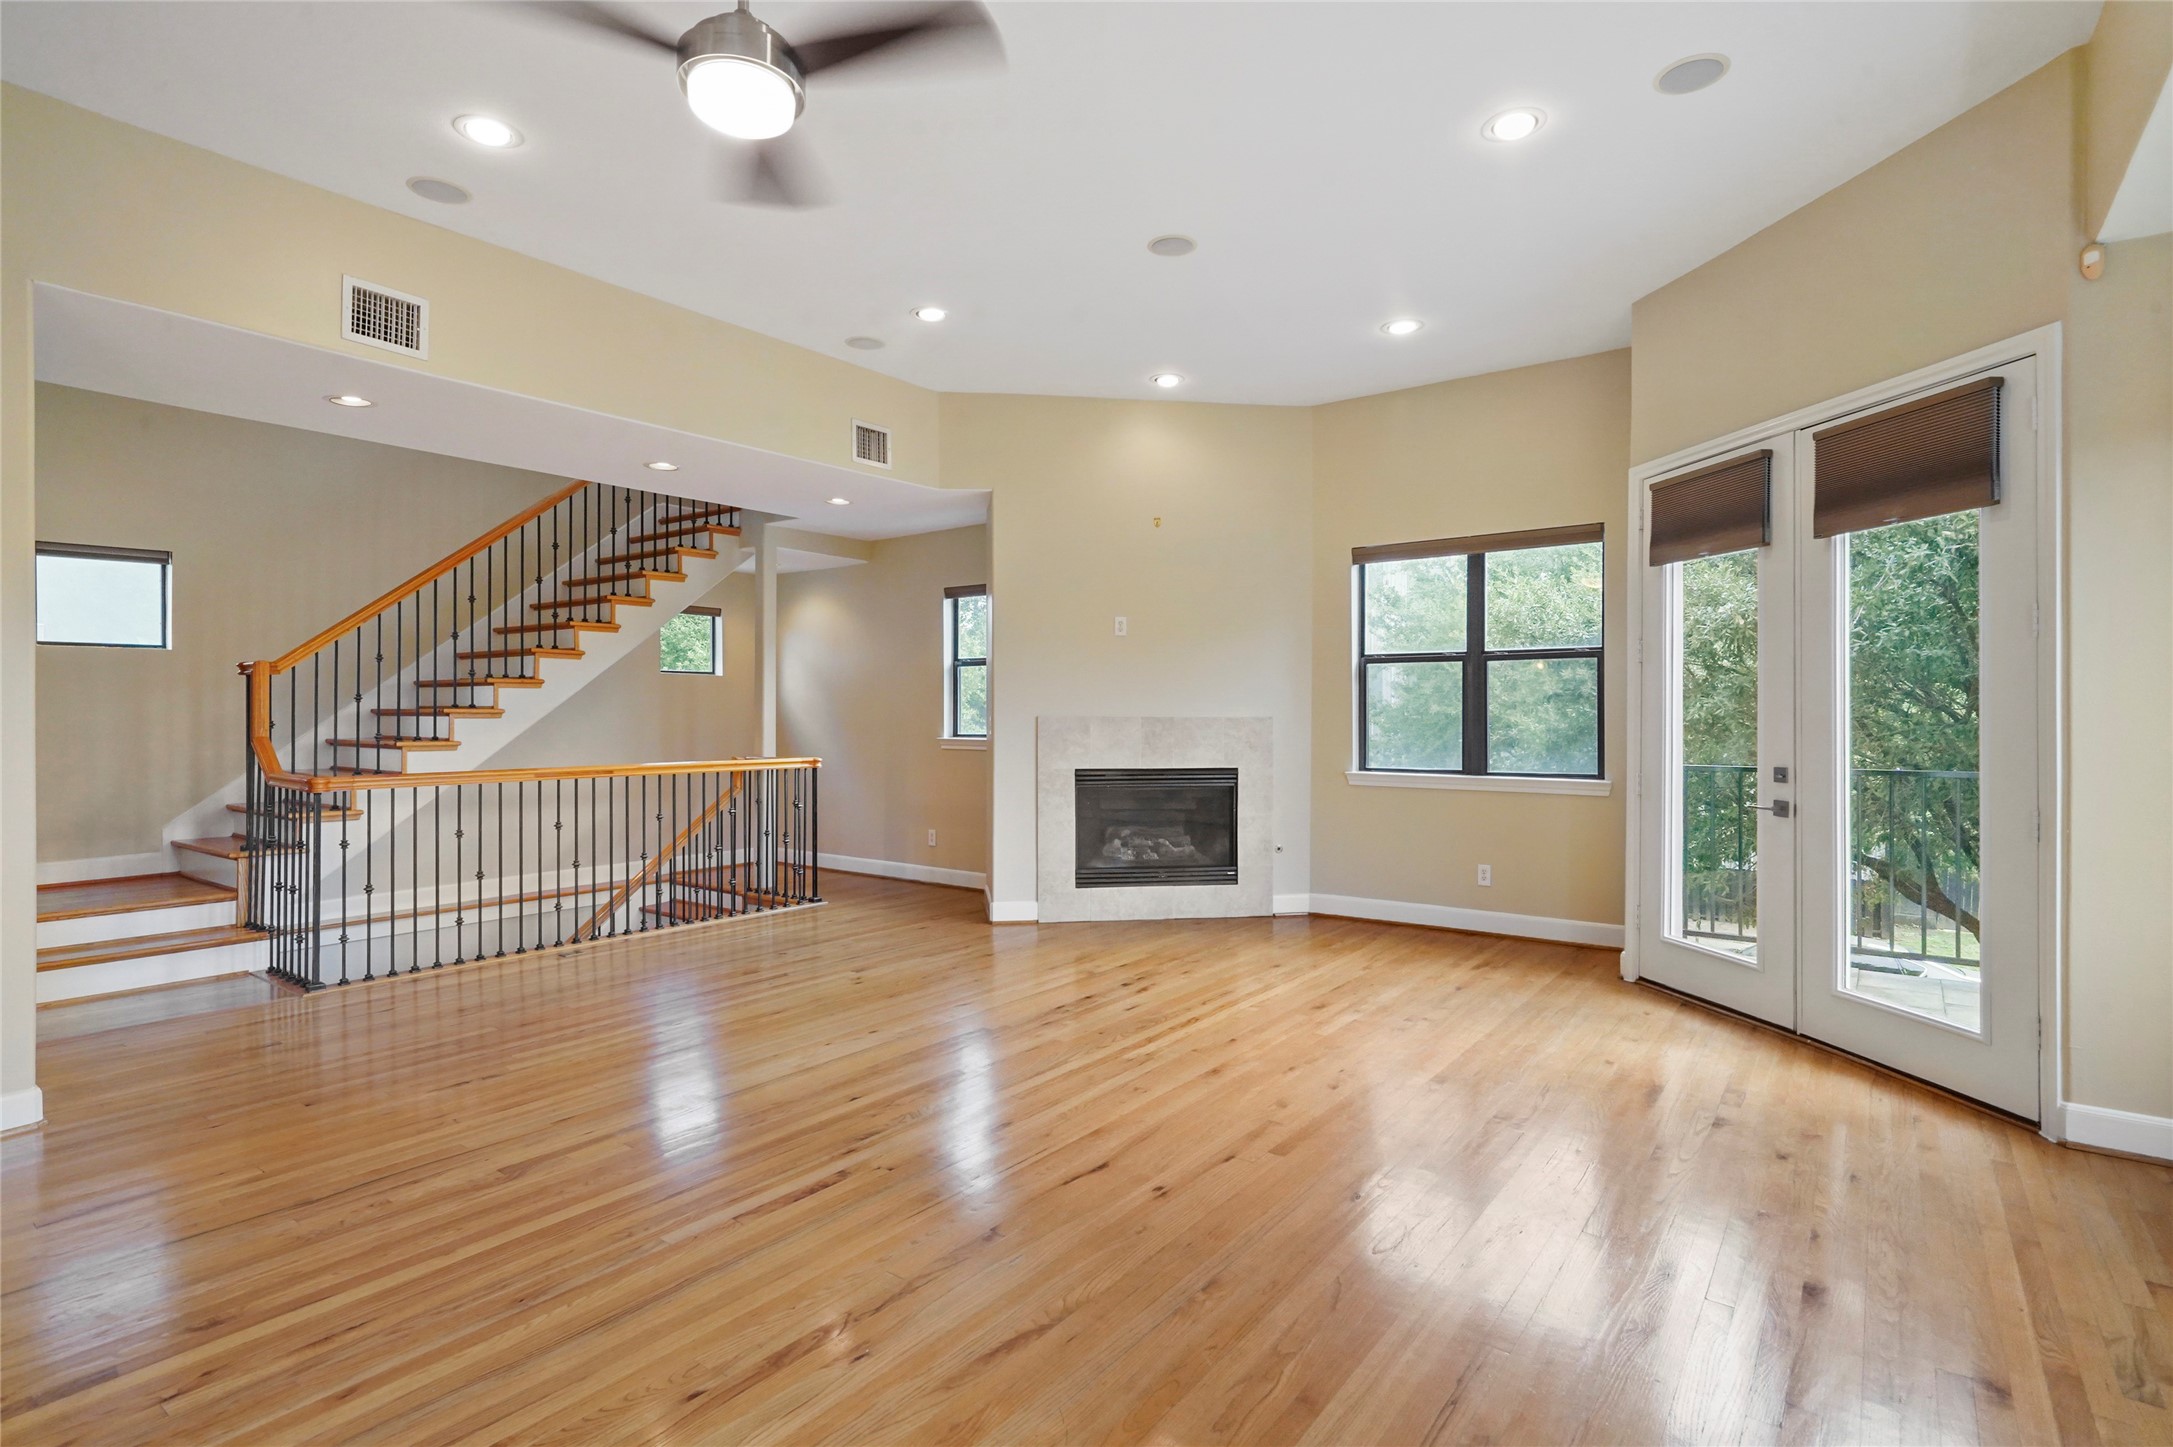 Large living area with fireplace and one of two balconies.